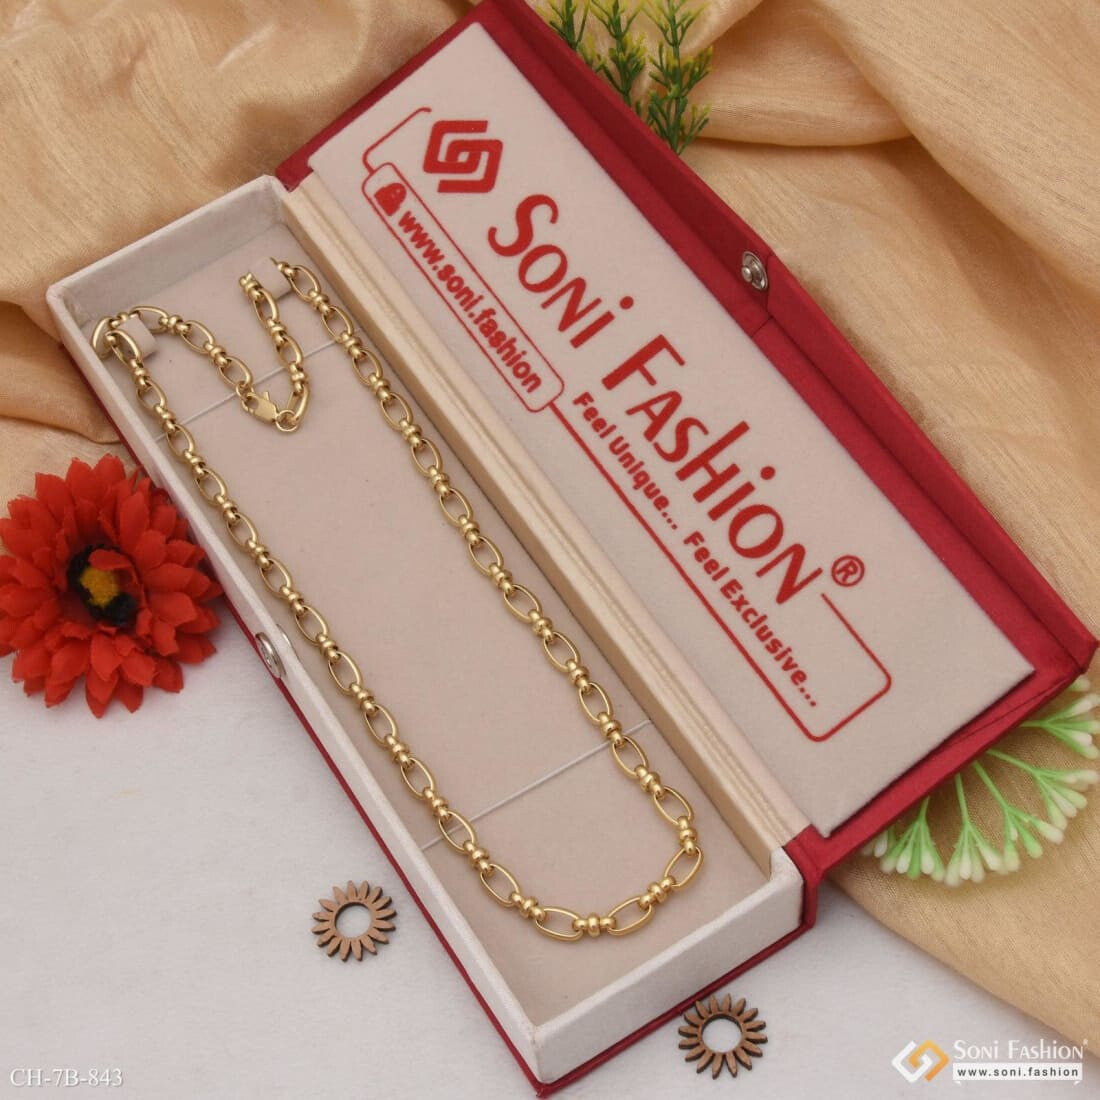 2 In 1 Linked Exquisite Design High-quality Golden Color Chain 